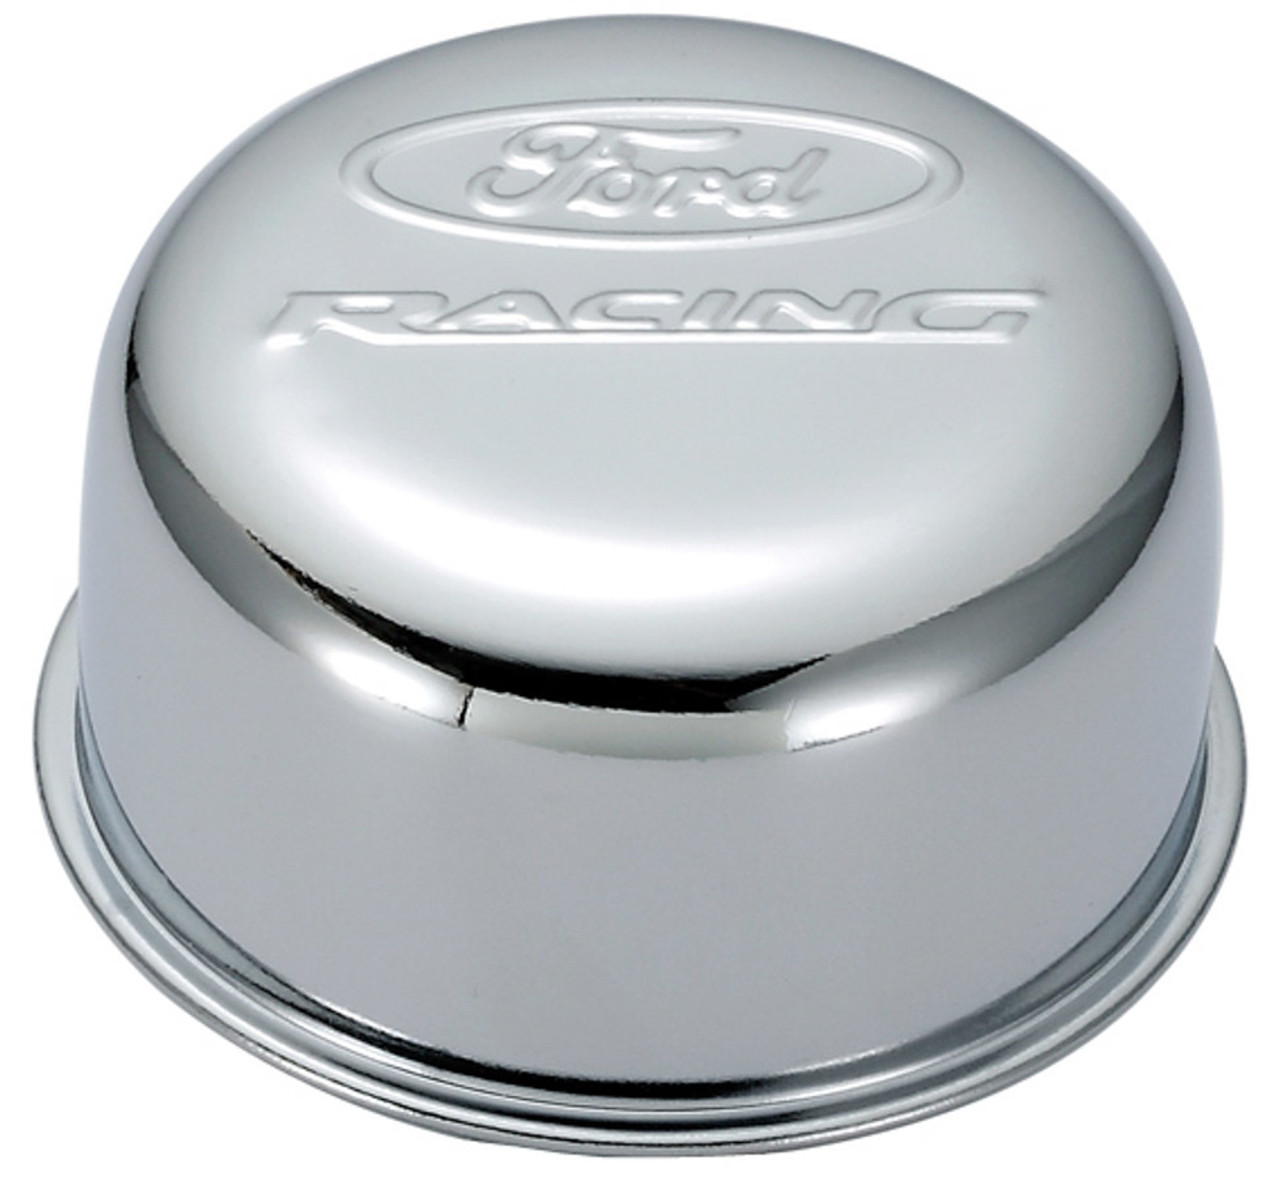 Ford Racing Air Breather Cap Chrome Twist-On